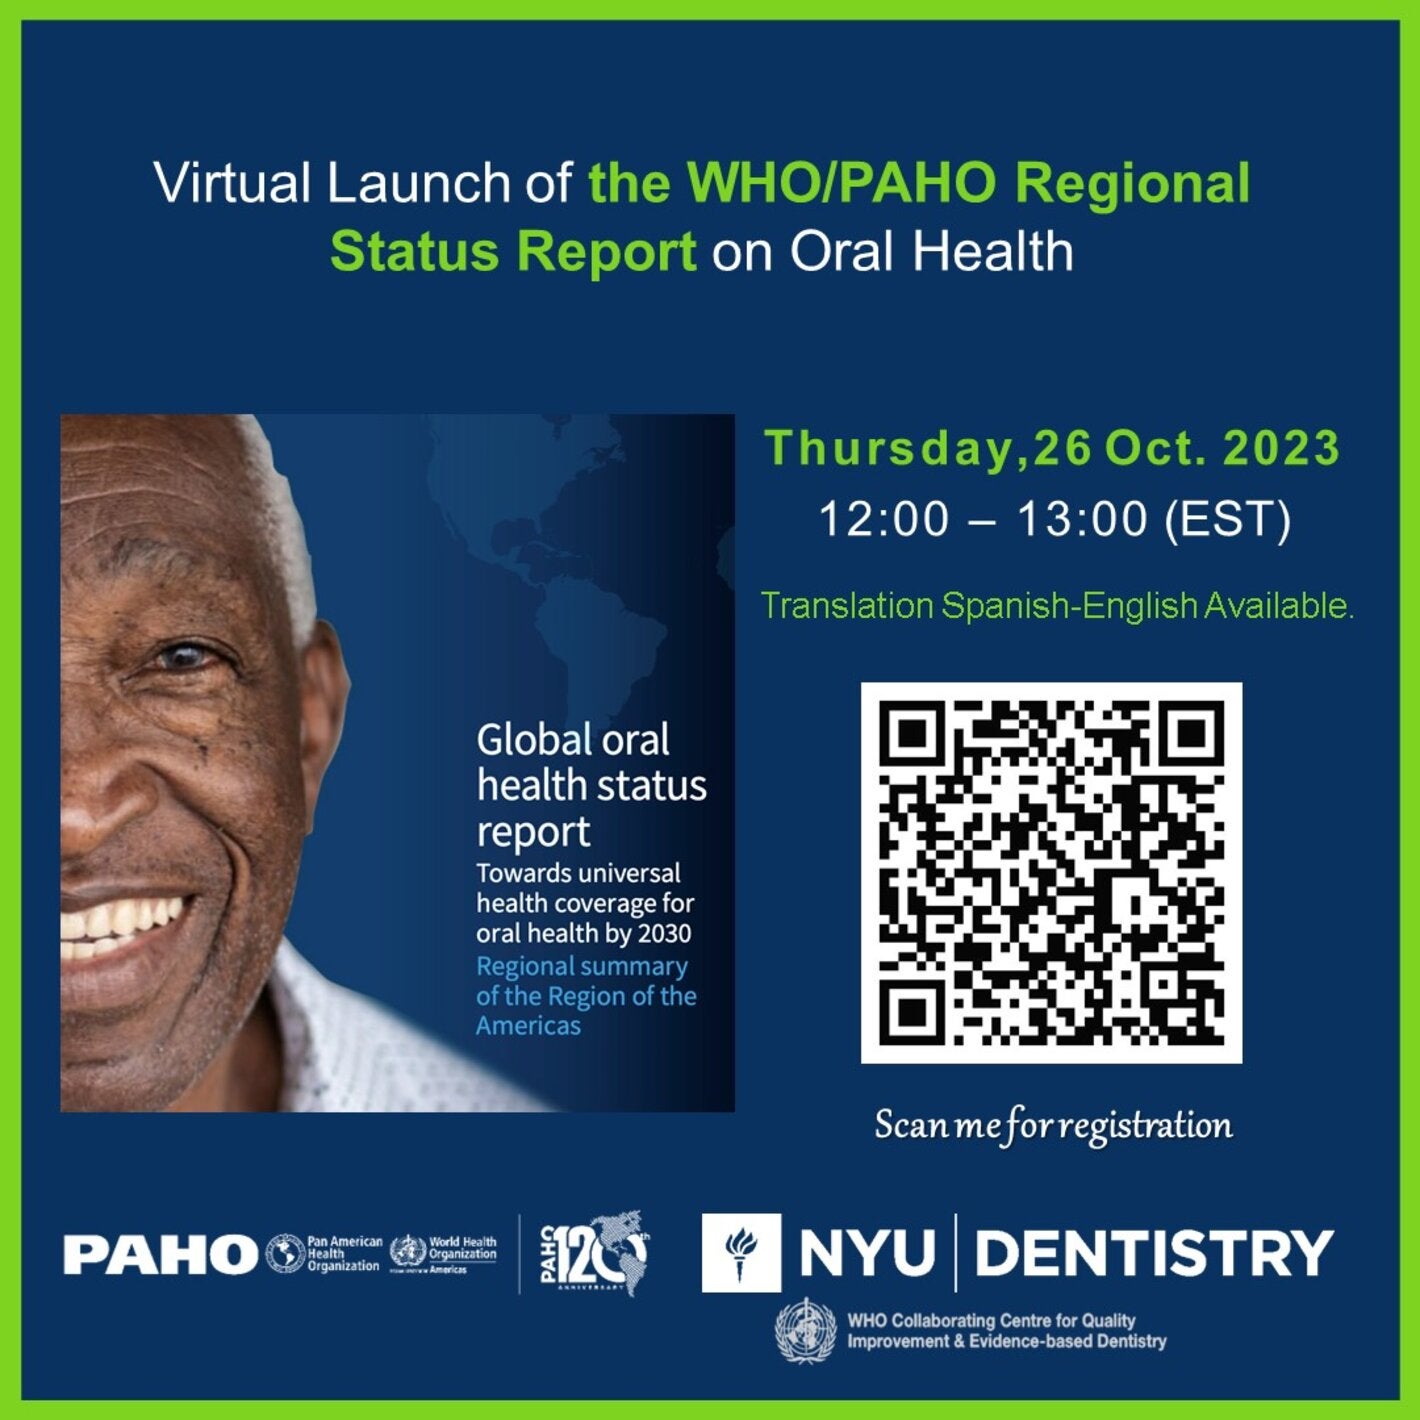 Virtual Launch of the WHO/PAHO Regional Status Report on Oral Health